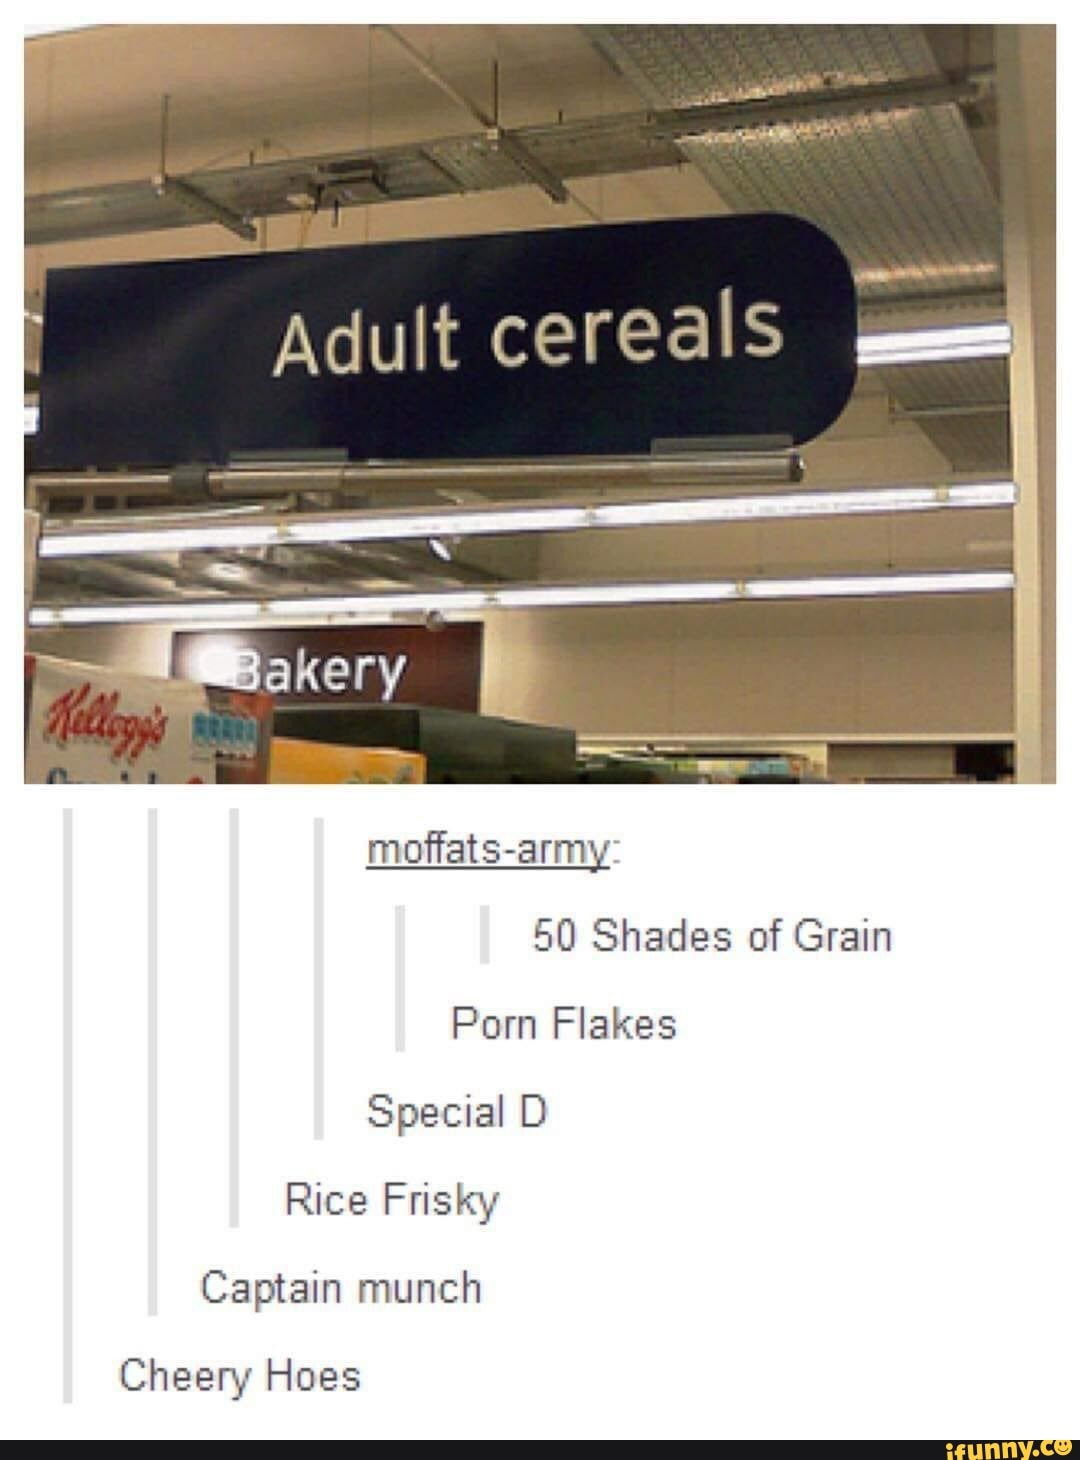 1080px x 1460px - Adult cereals moffats-army: 50 Shades of Grain Porn Flakes Special D Rice  Frisky Captain munch Cheery Hoes - iFunny Brazil